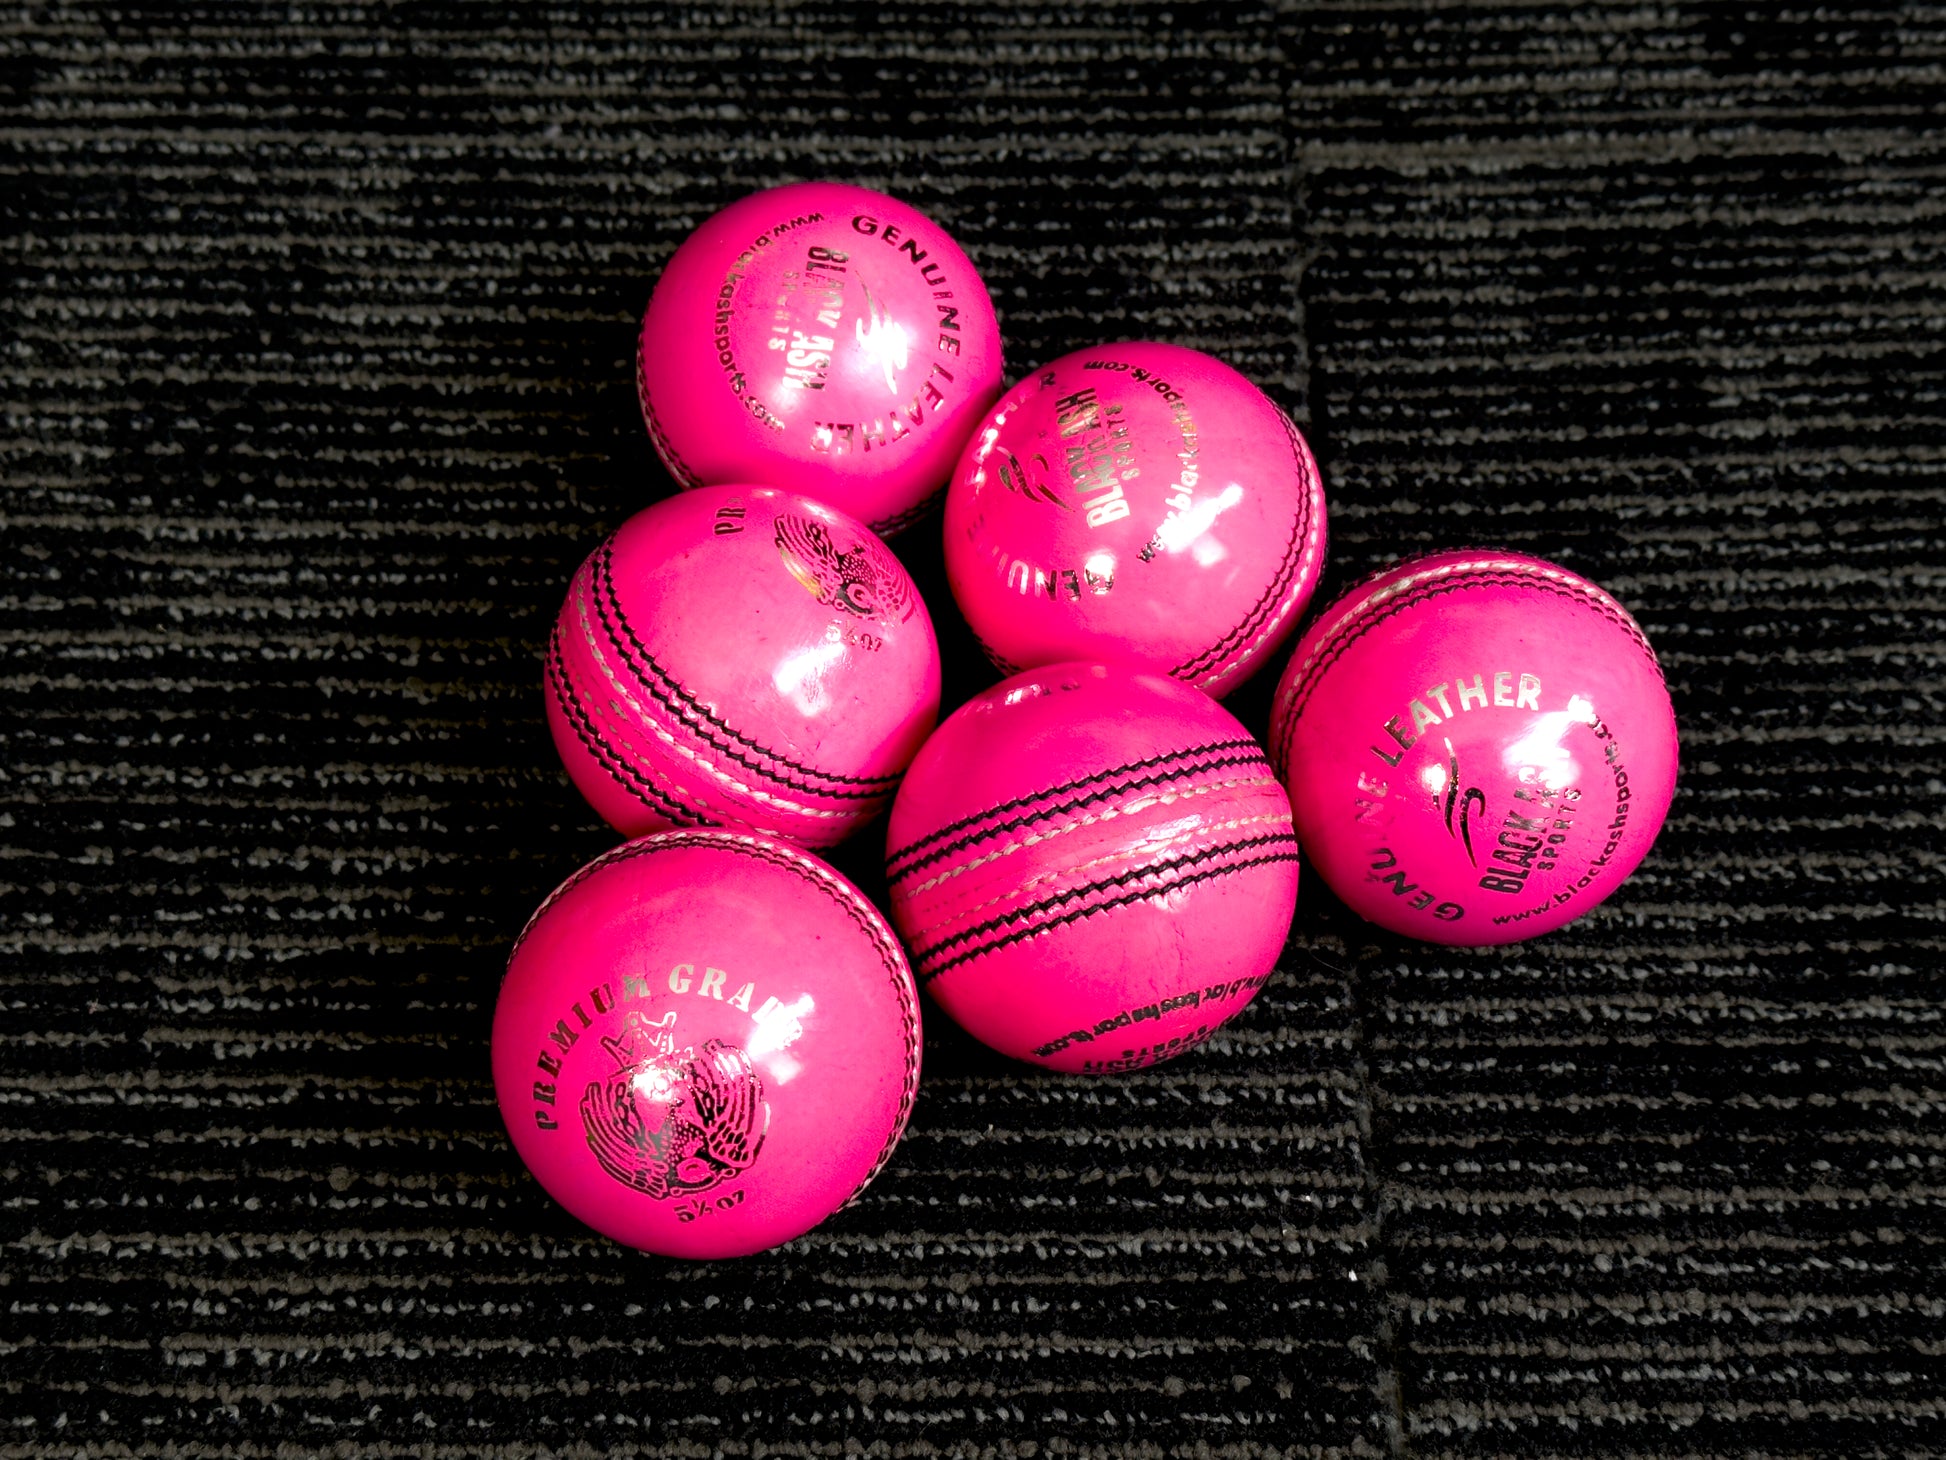 Black Ash Premium grade pack of 6 pink cricket leather balls, each 156 grams, made of genuine leather with 4-piece construction, excellent shape retention, suitable for 30 to 35 overs, and meeting MCC regulations.